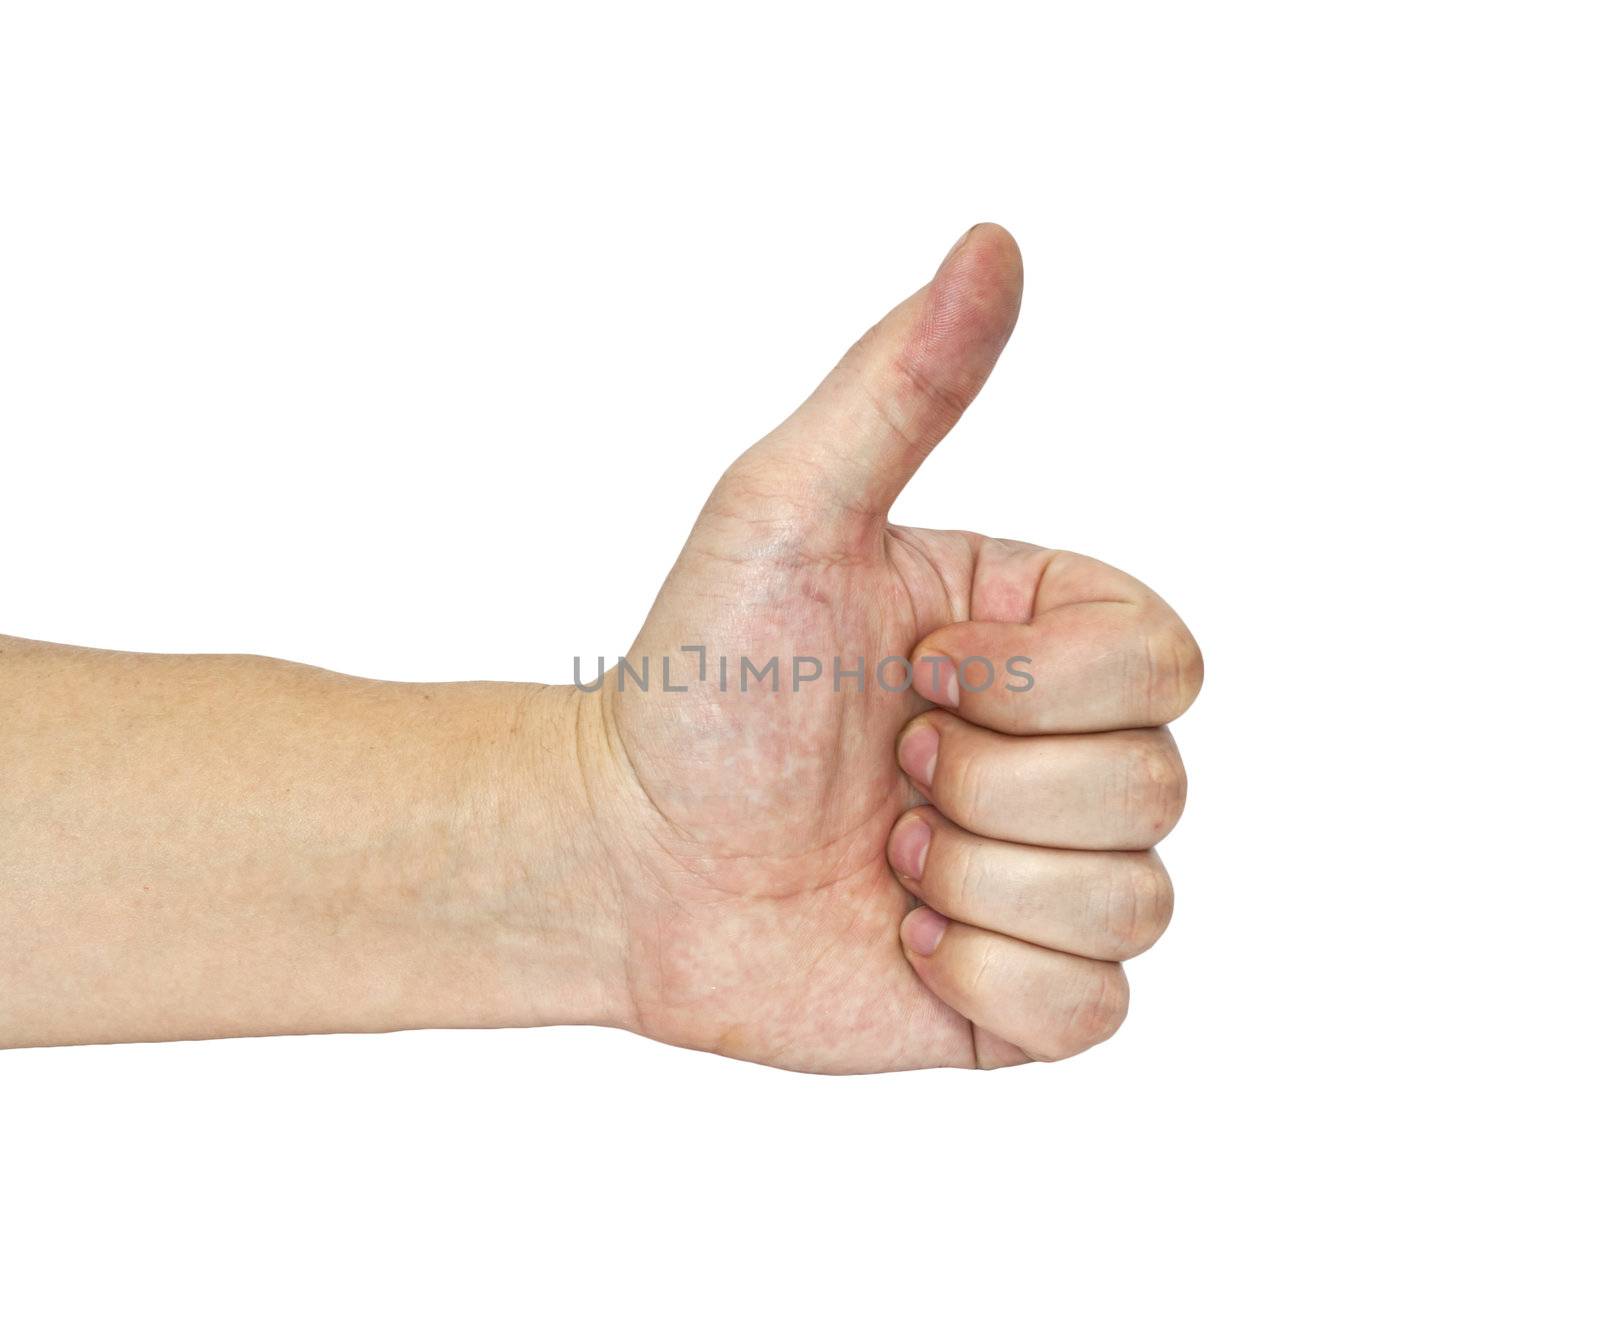 men's hand make thumbs up isolated over white 